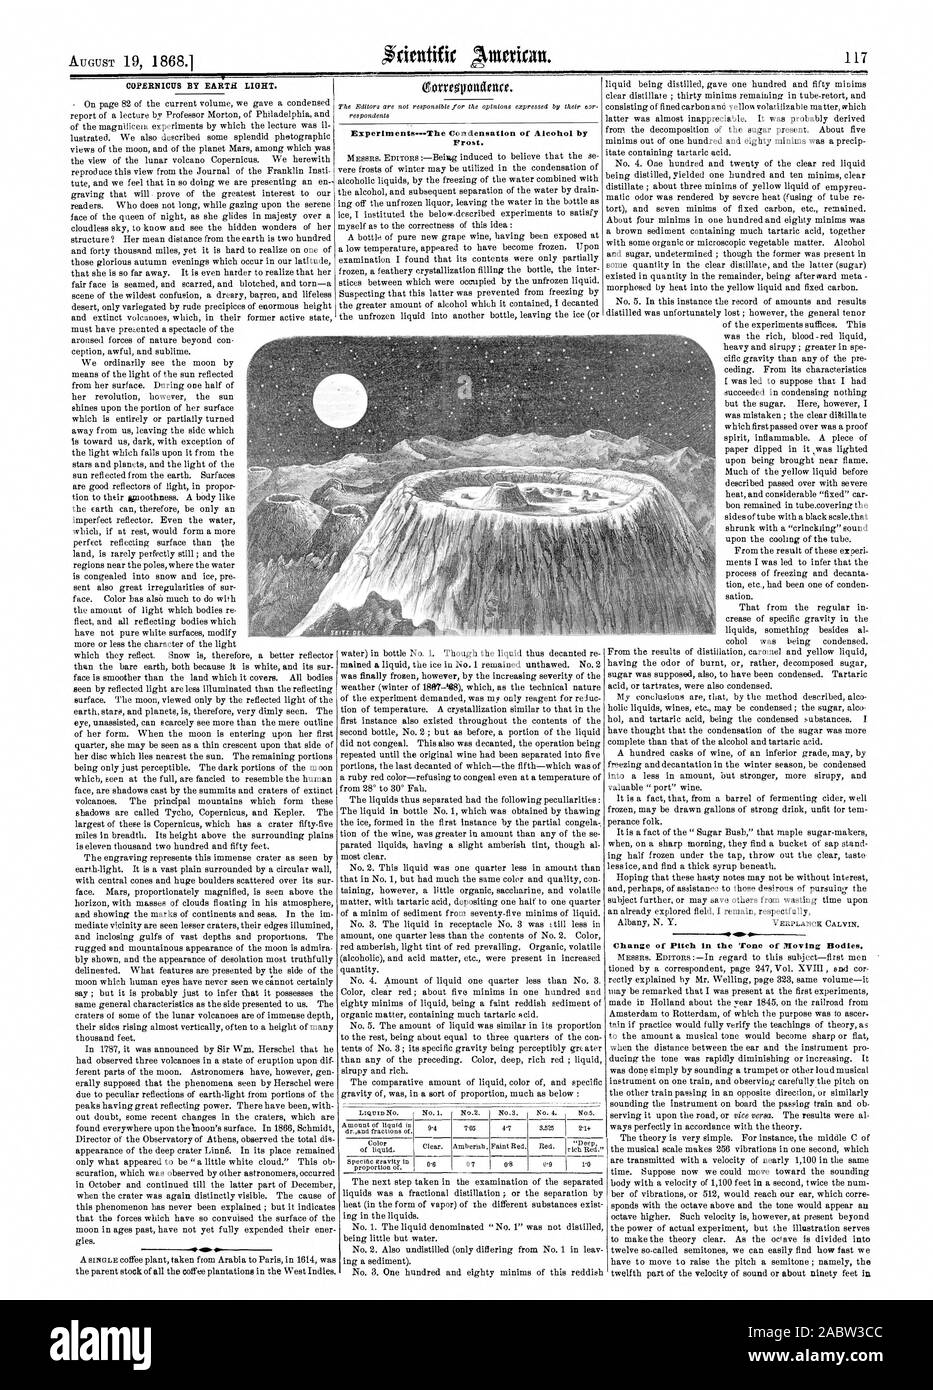 7 COPERNICUS BY EARTH LIGHT. .e. Change of Pitch in the Tone of Moving Bodies Experiments—The Condensation of Alcohol by Frost., scientific american, 1868-08-19 Stock Photo